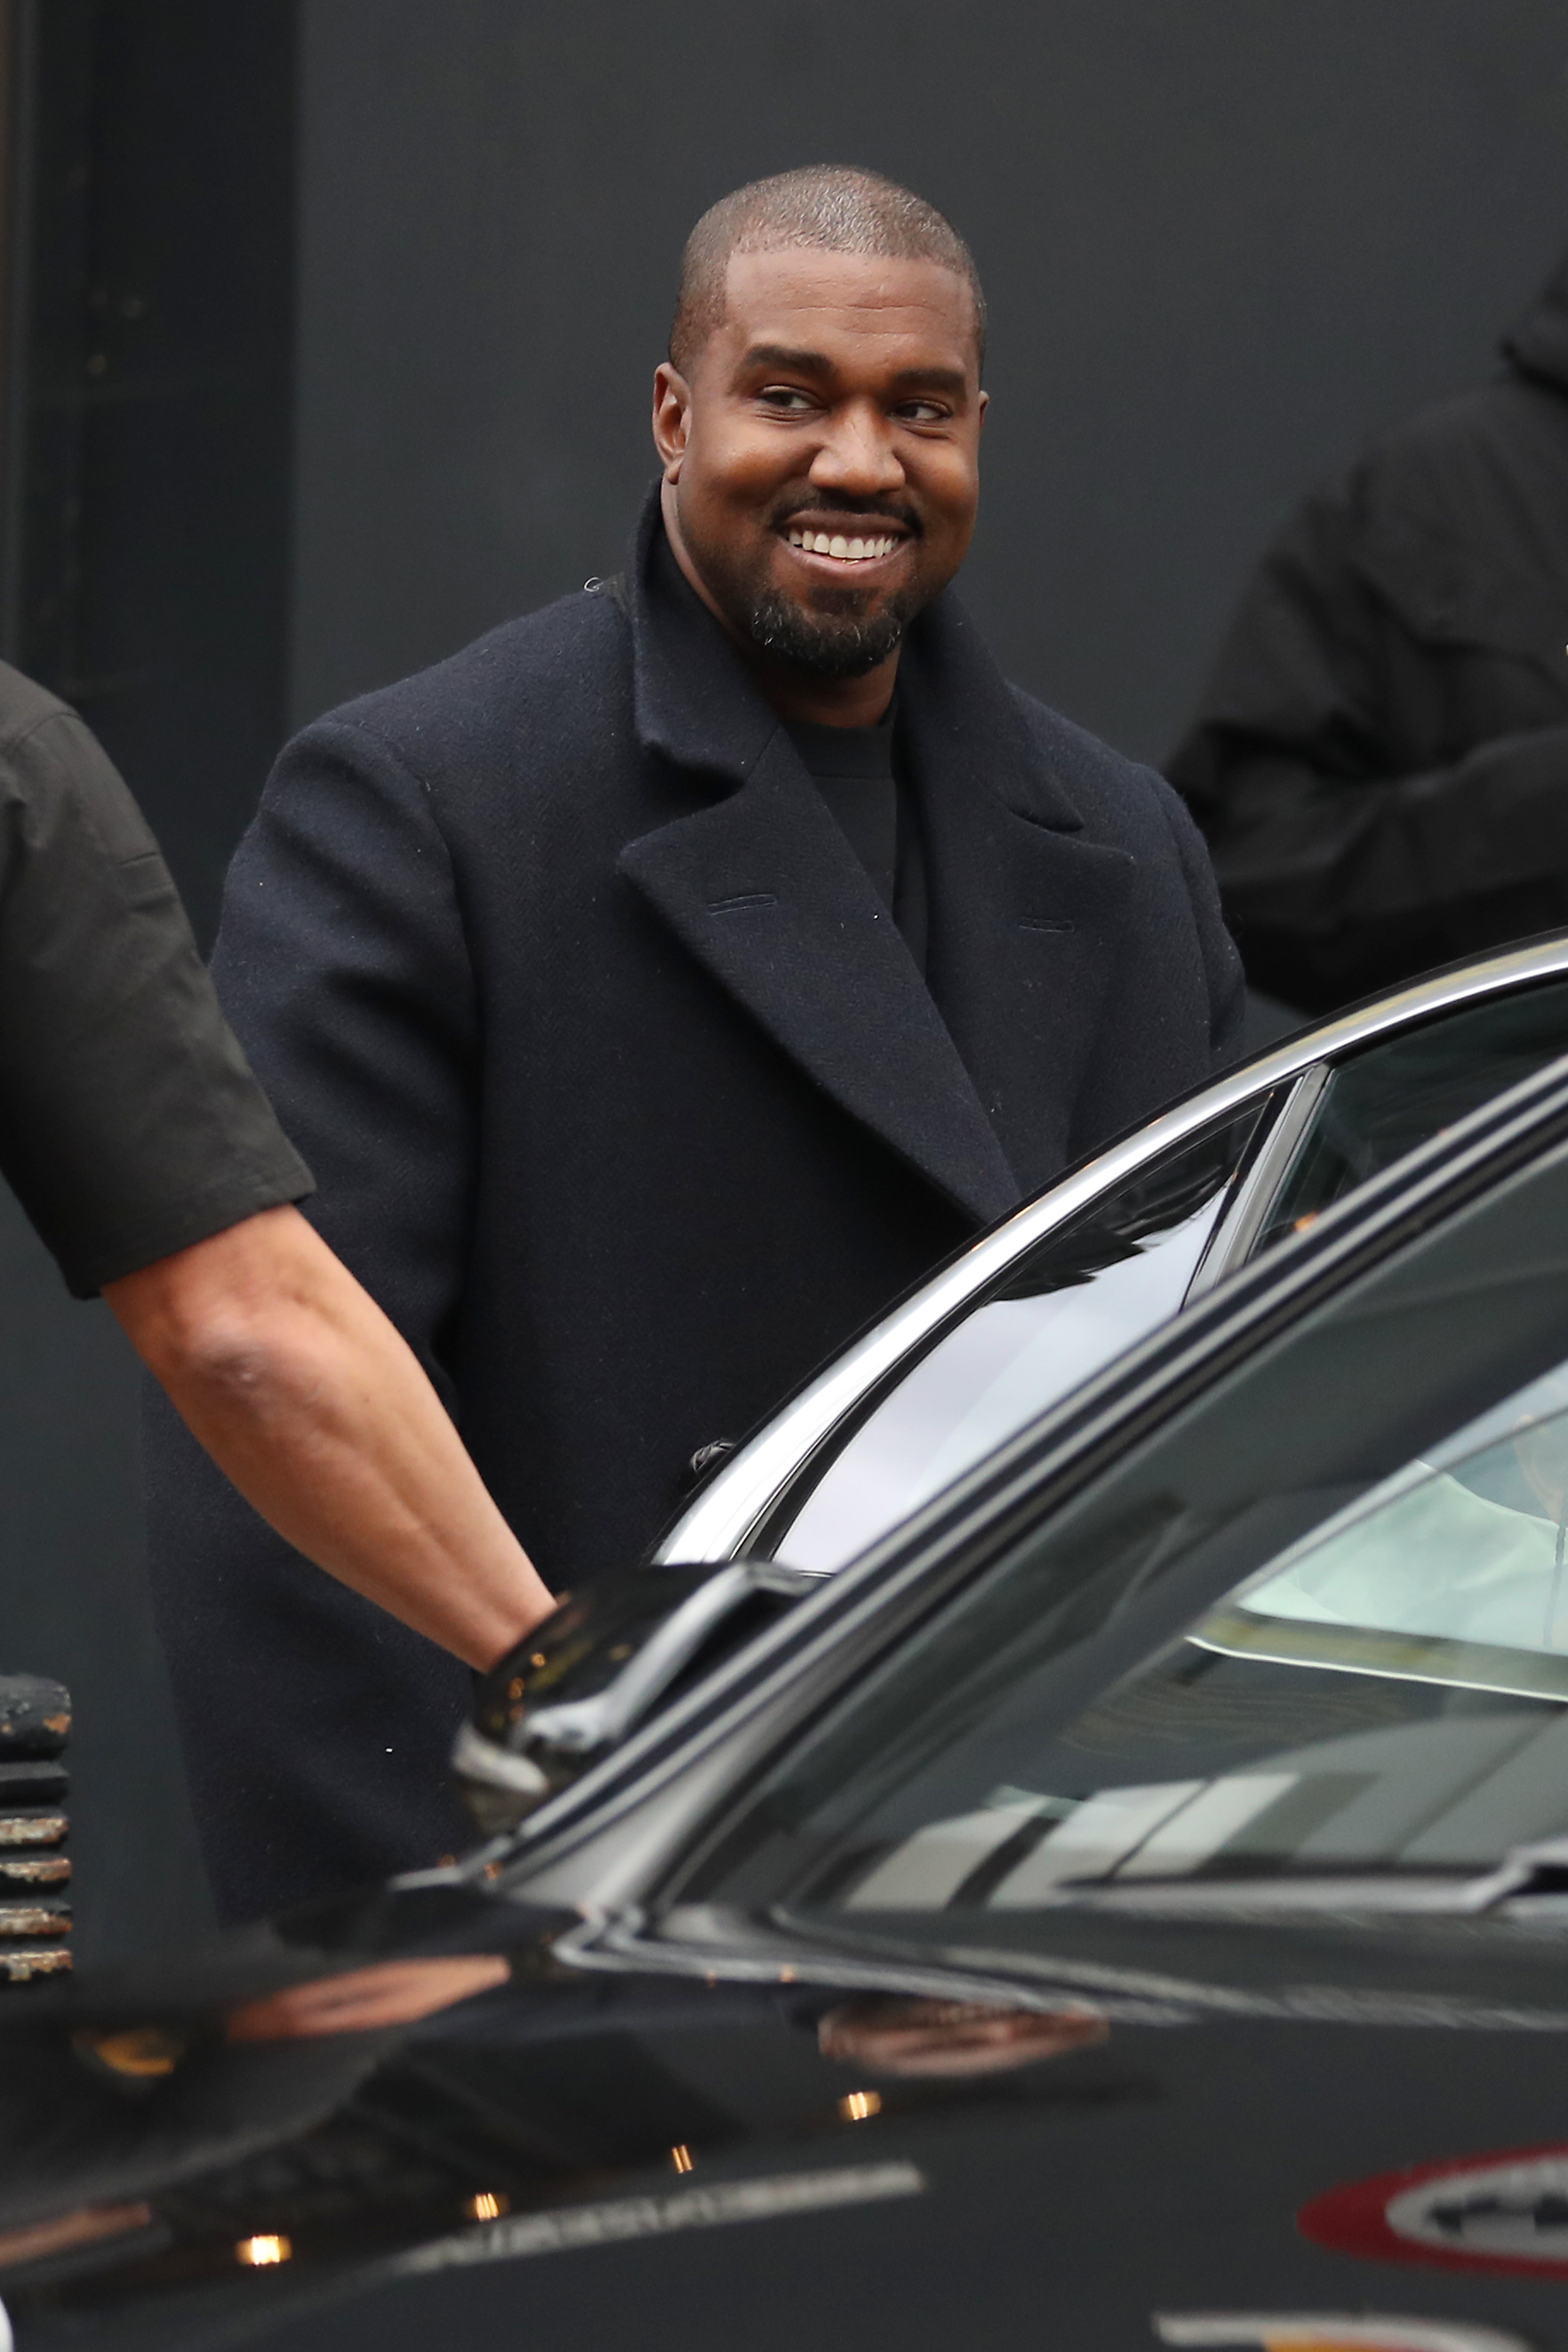 Kanye smiling and wearing a coat